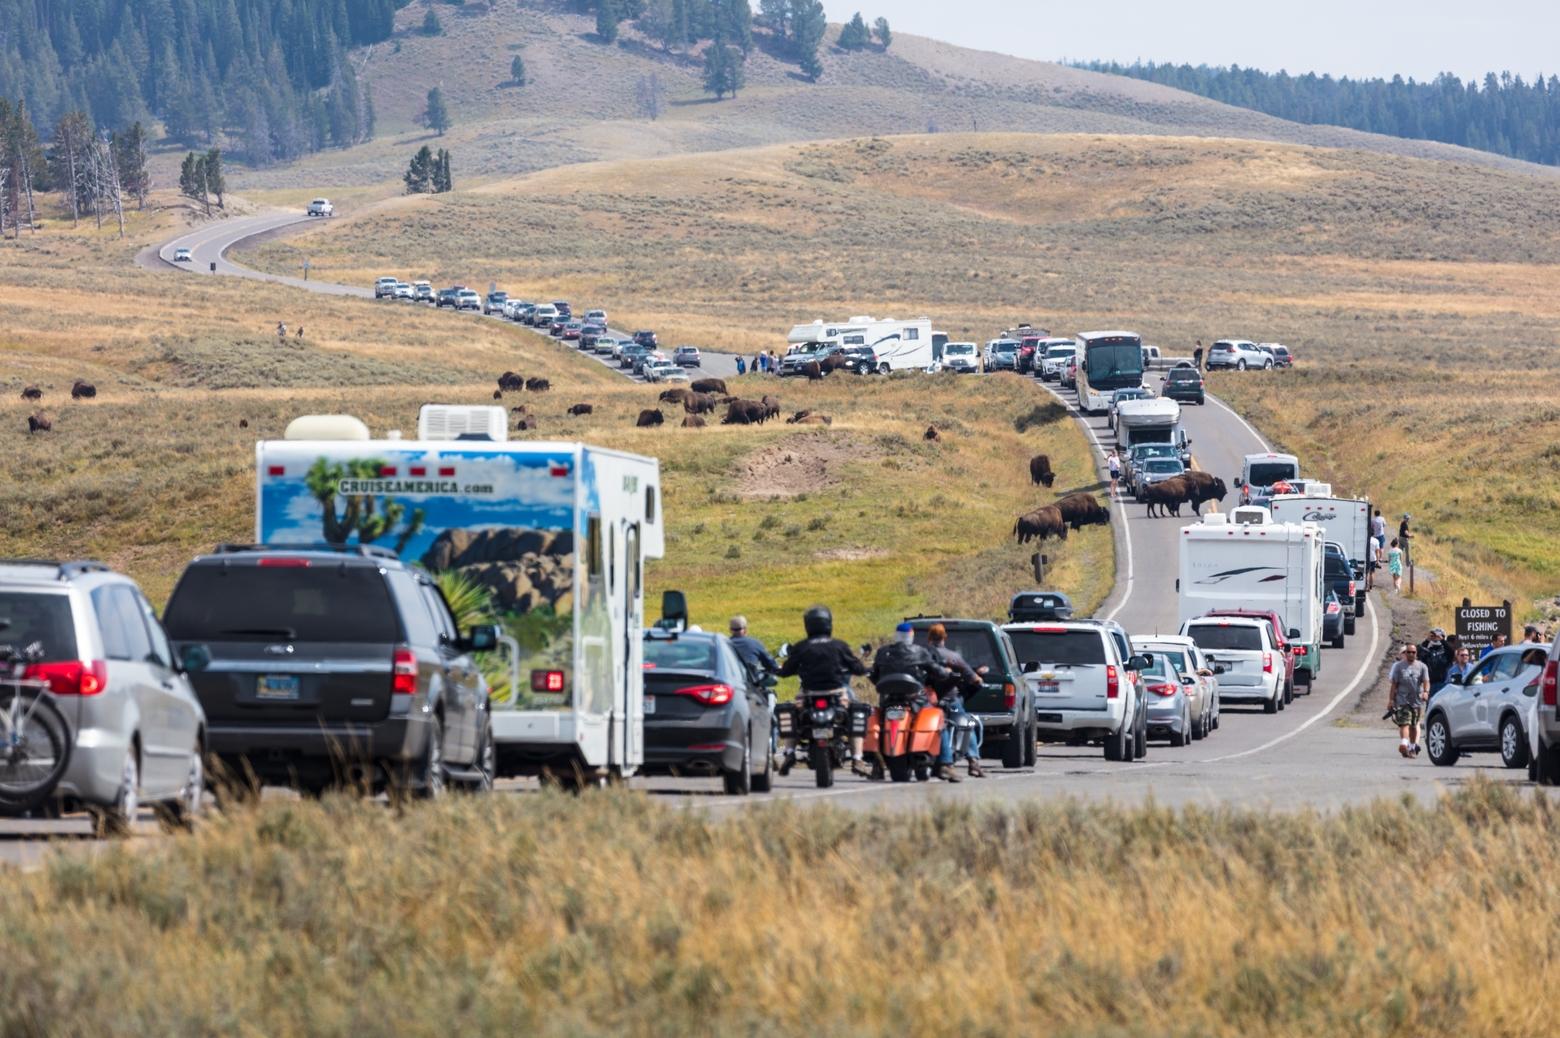 The National Park Service has experience trying to find a better balance between the needs of wildlife and people, Wuerthner says. But studies show that national parks are not large enough to preserve wildlife and ecological processes. Even Yellowstone needs to be able to breathe, as shown here in Hayden Valley, when congestion clogs some of its arteries. Photo courtesy Jacob W. Frank/NPS